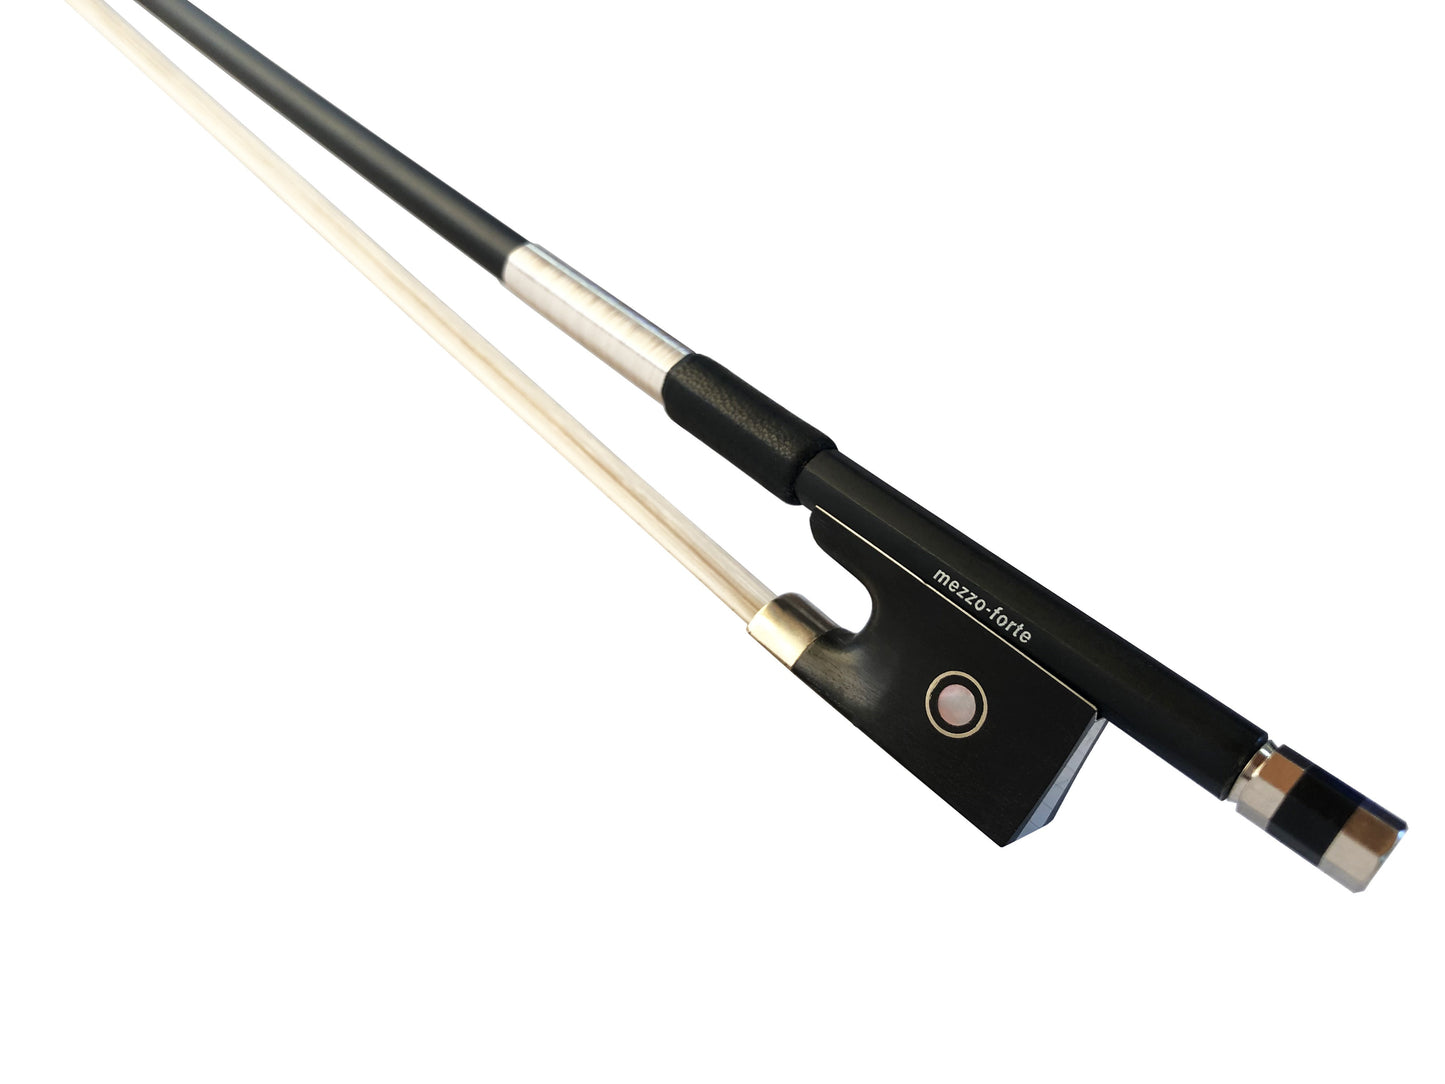 Violin bow Violin bow carbon 4/4, easy to play and robust